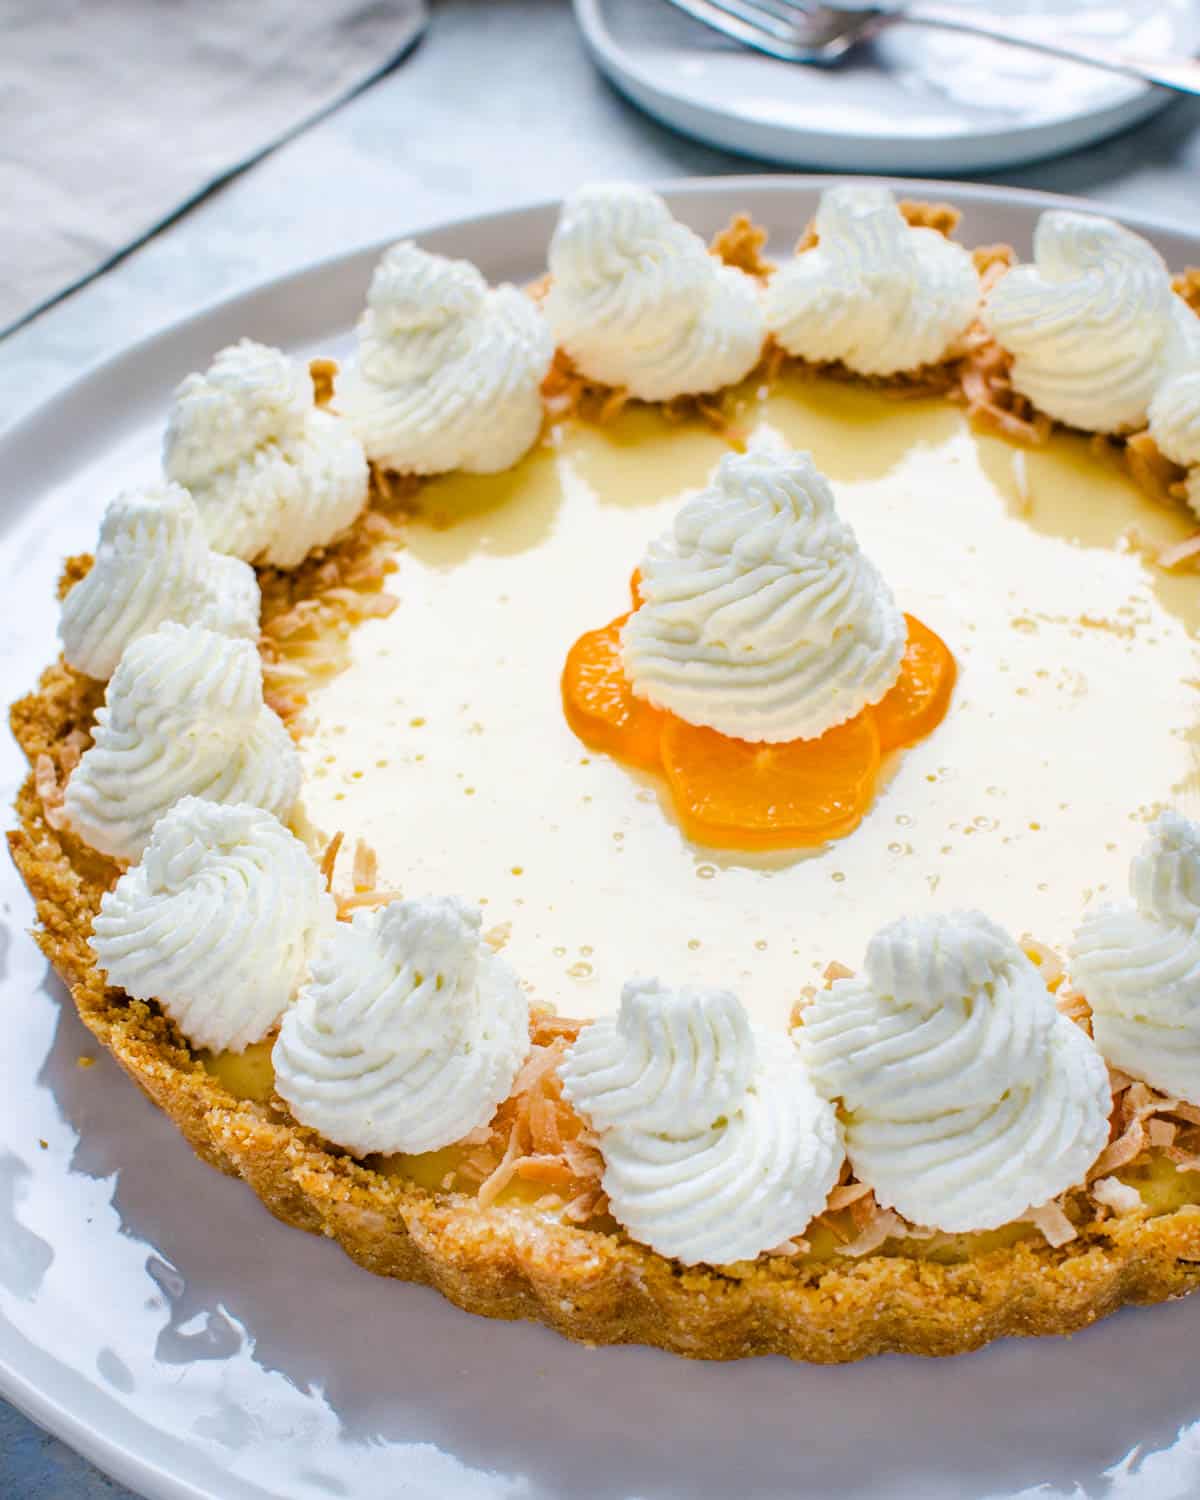 A calamondin pie with graham cracker crust and whipped cream.